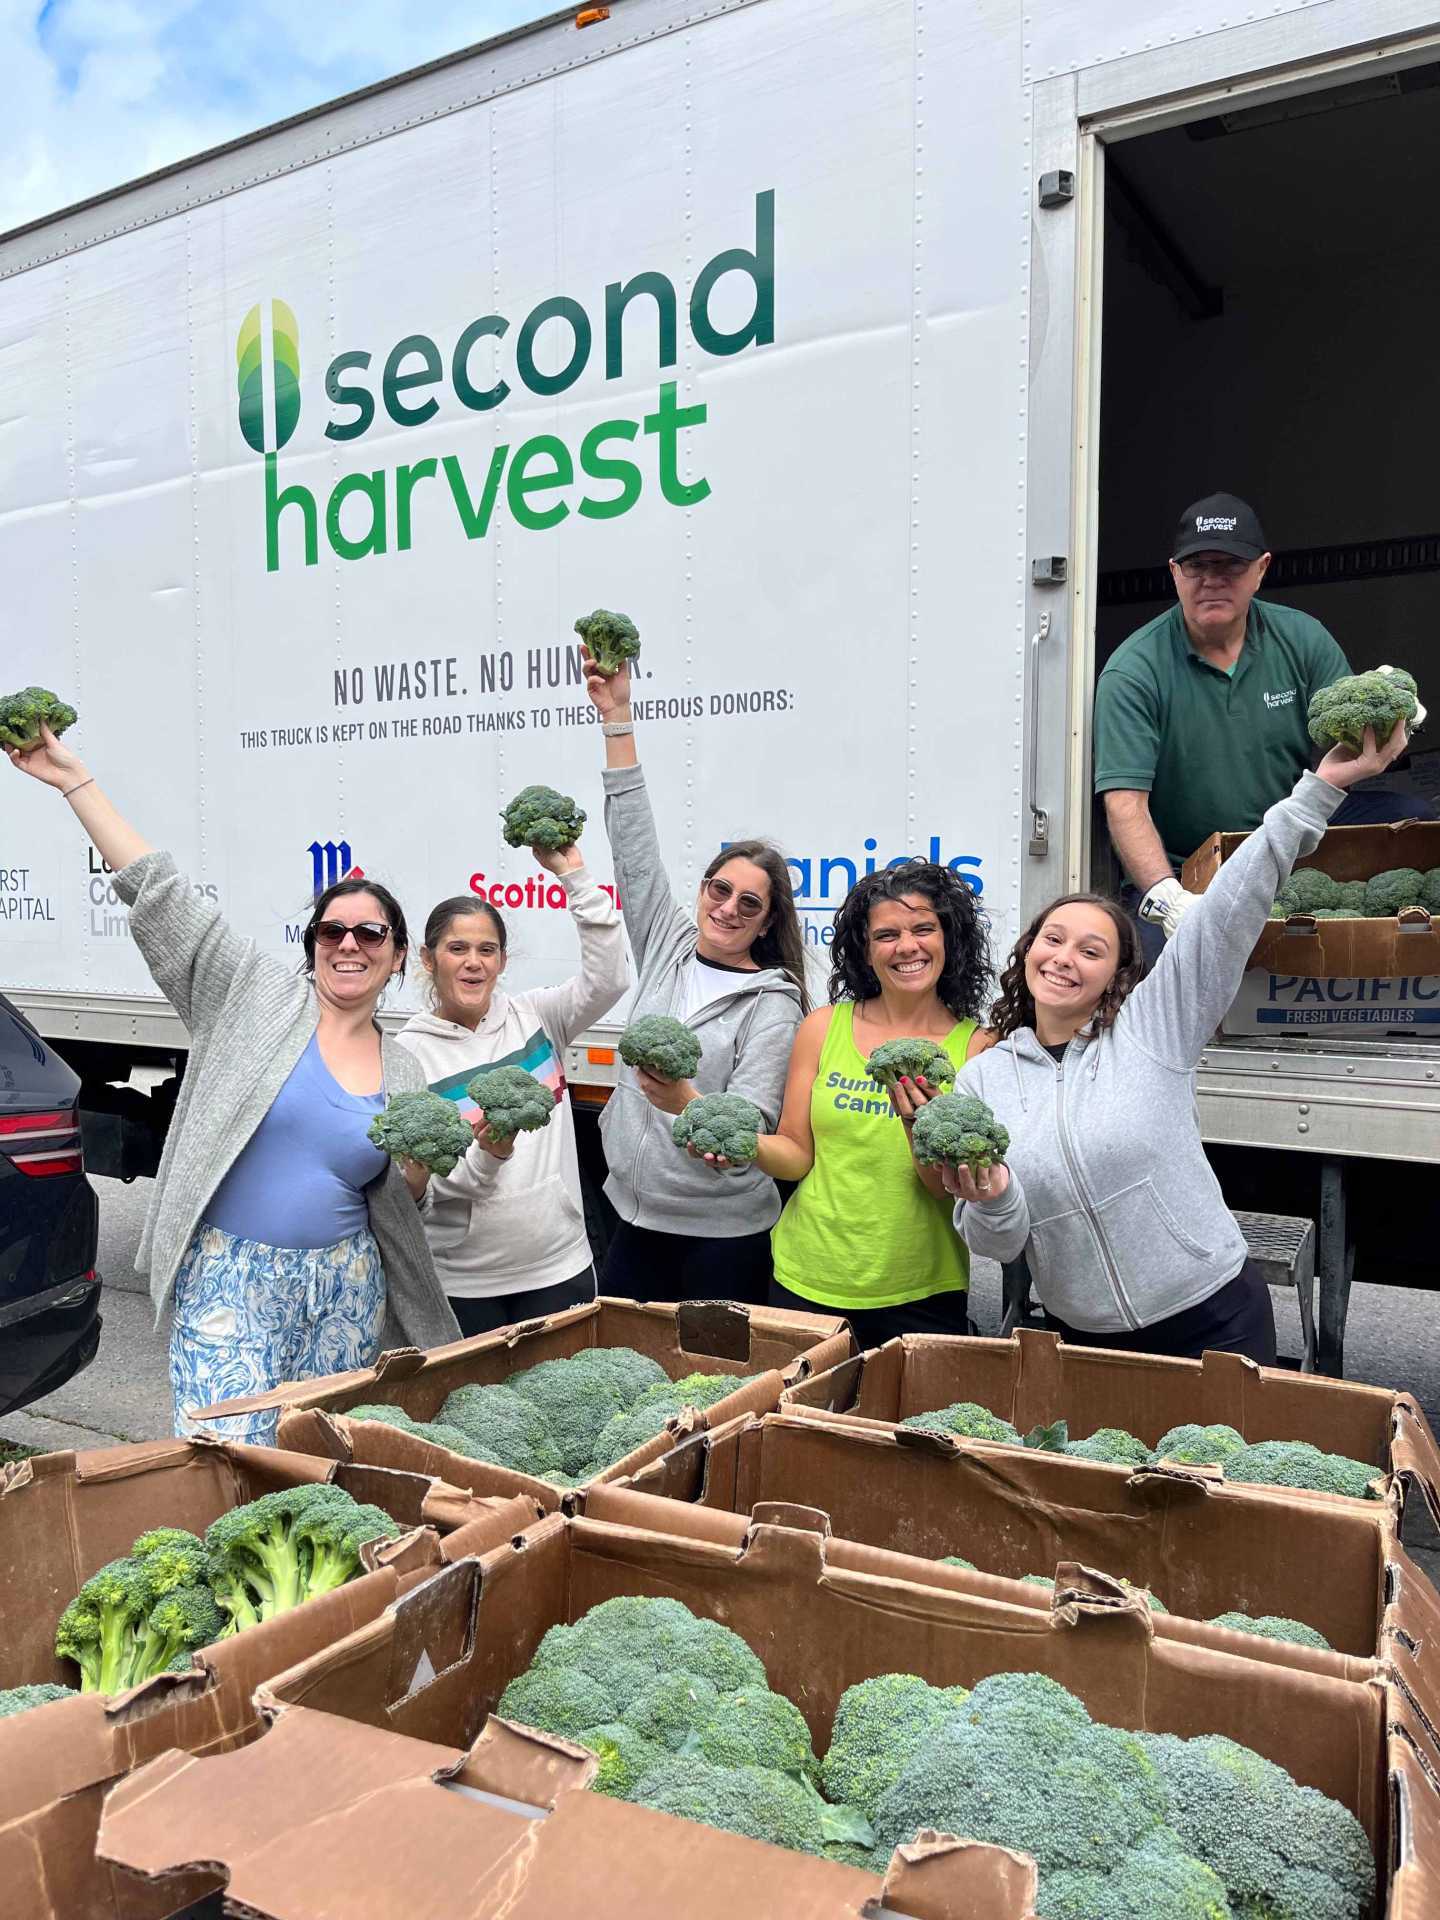 A group of Second Harvest volunteers holding broccoli in the air